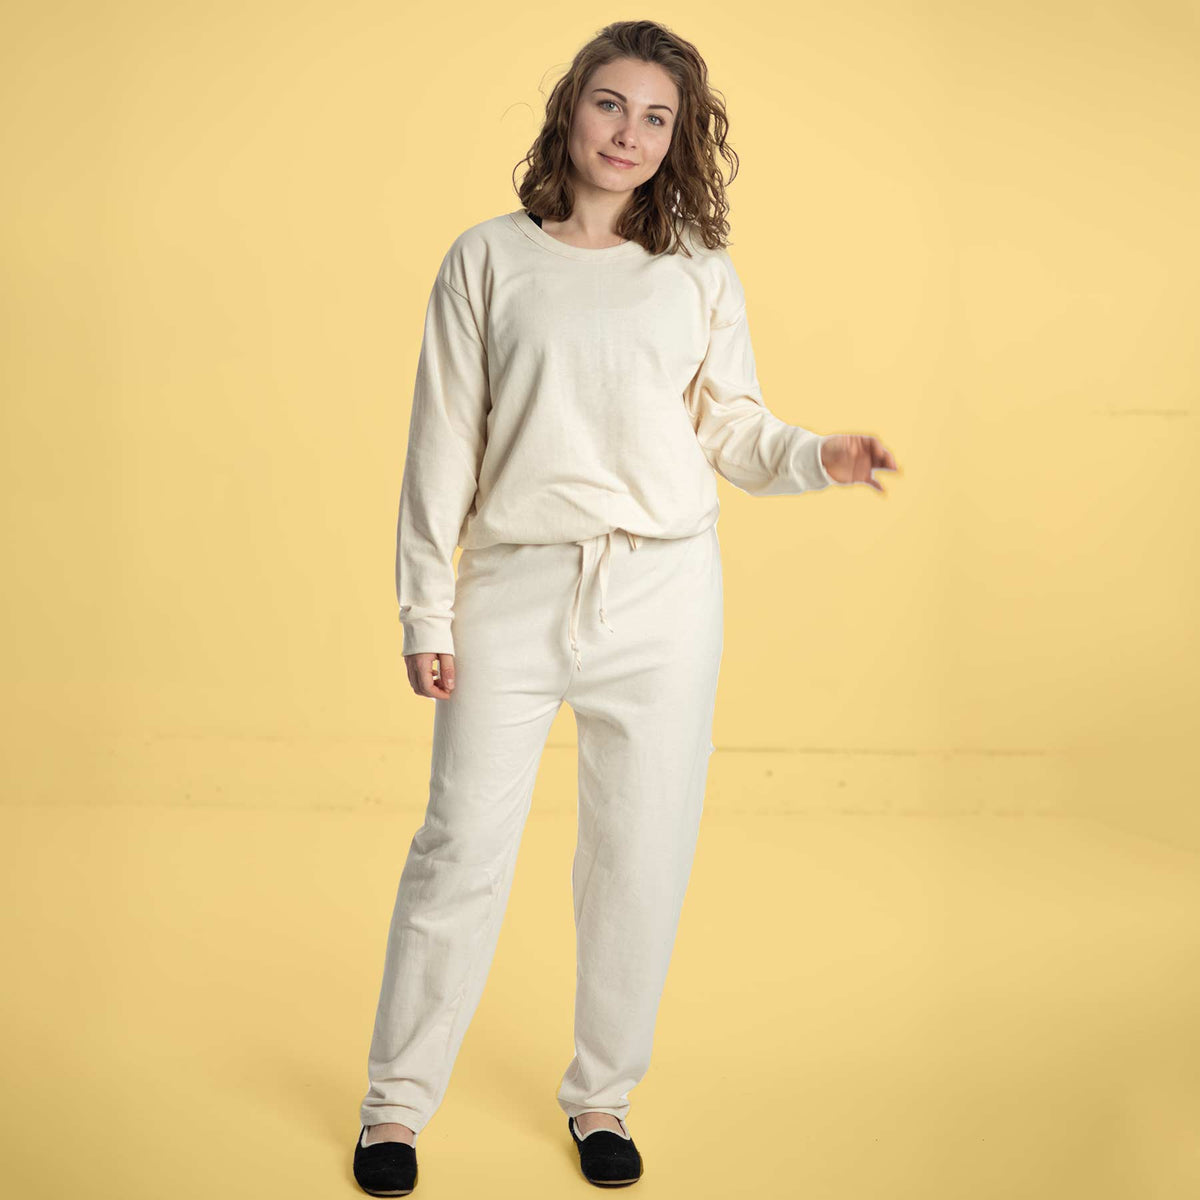 10 Sustainable Joggers And Organic Cotton Sweatpants Sets - The